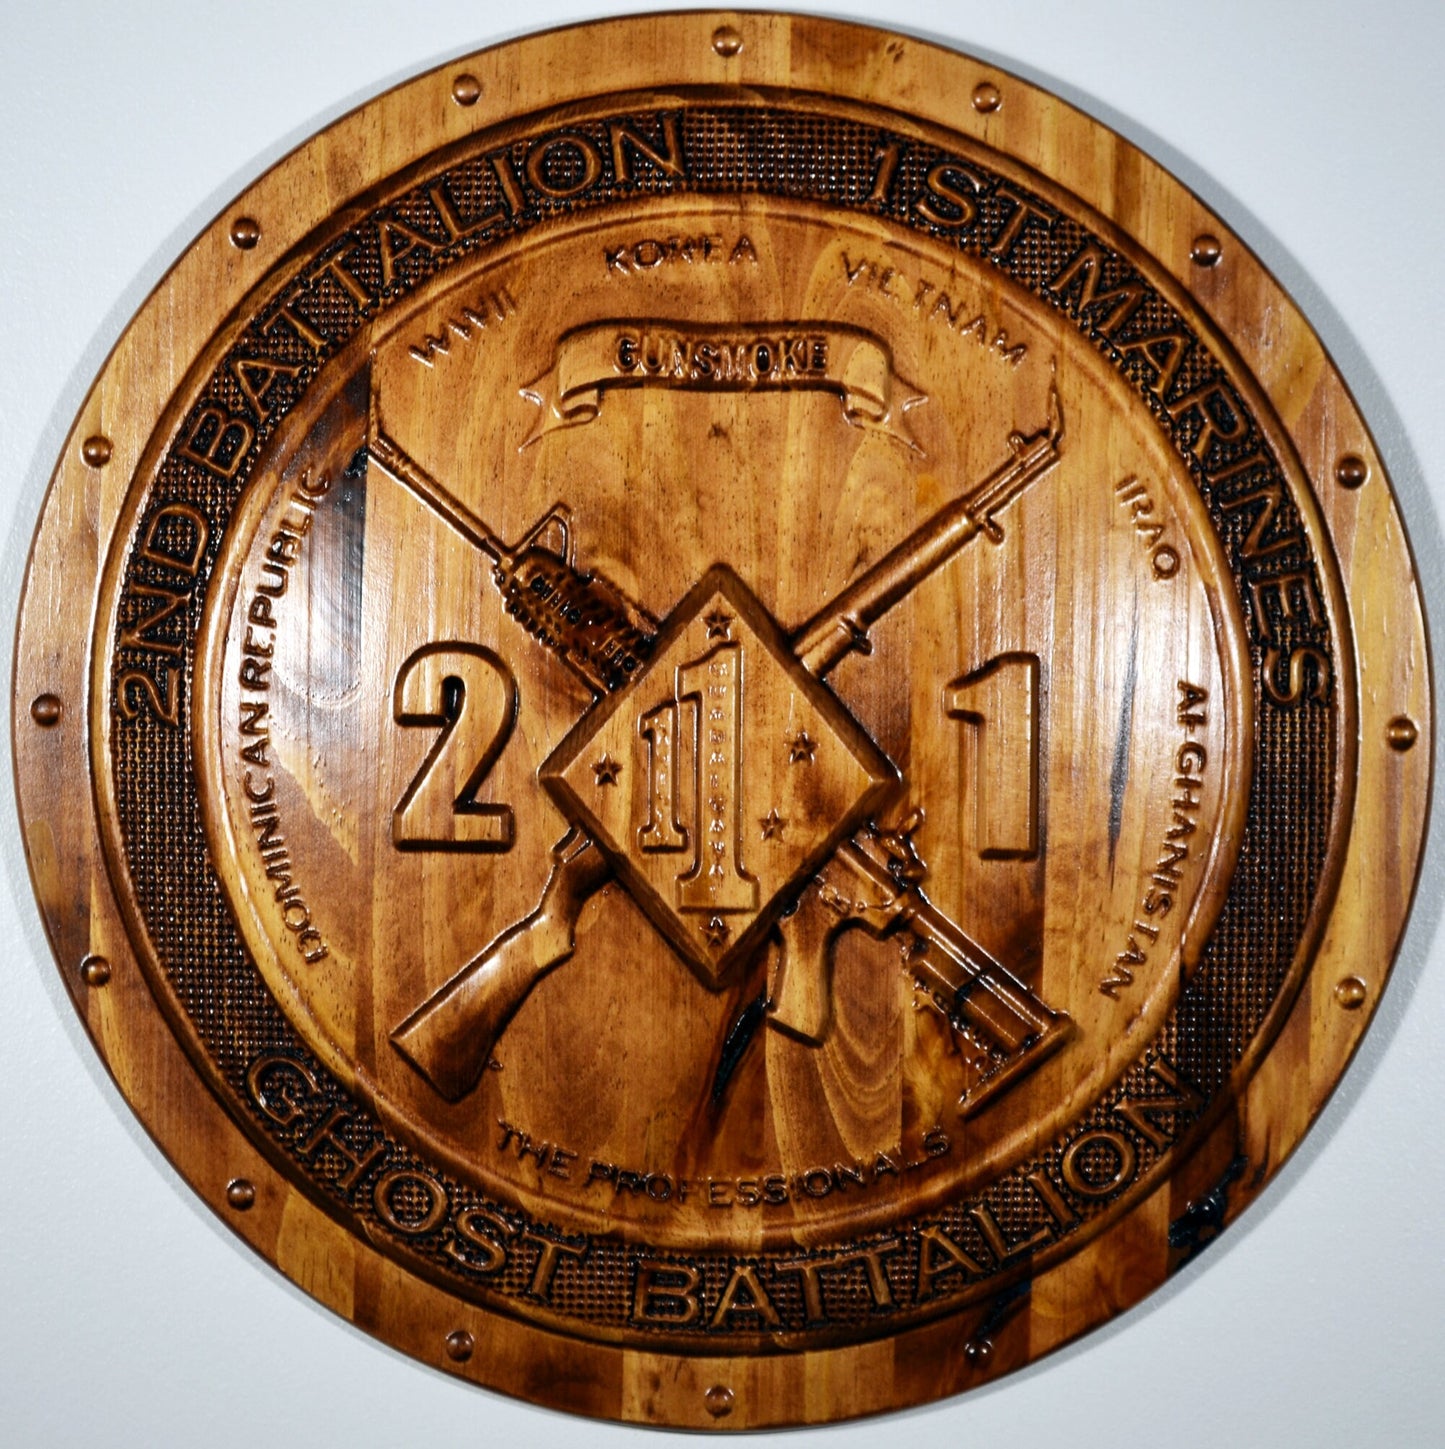 USMC 2nd Battalion 1st Marine Division,  US Marine Corps, 3d wood carving, military plaque